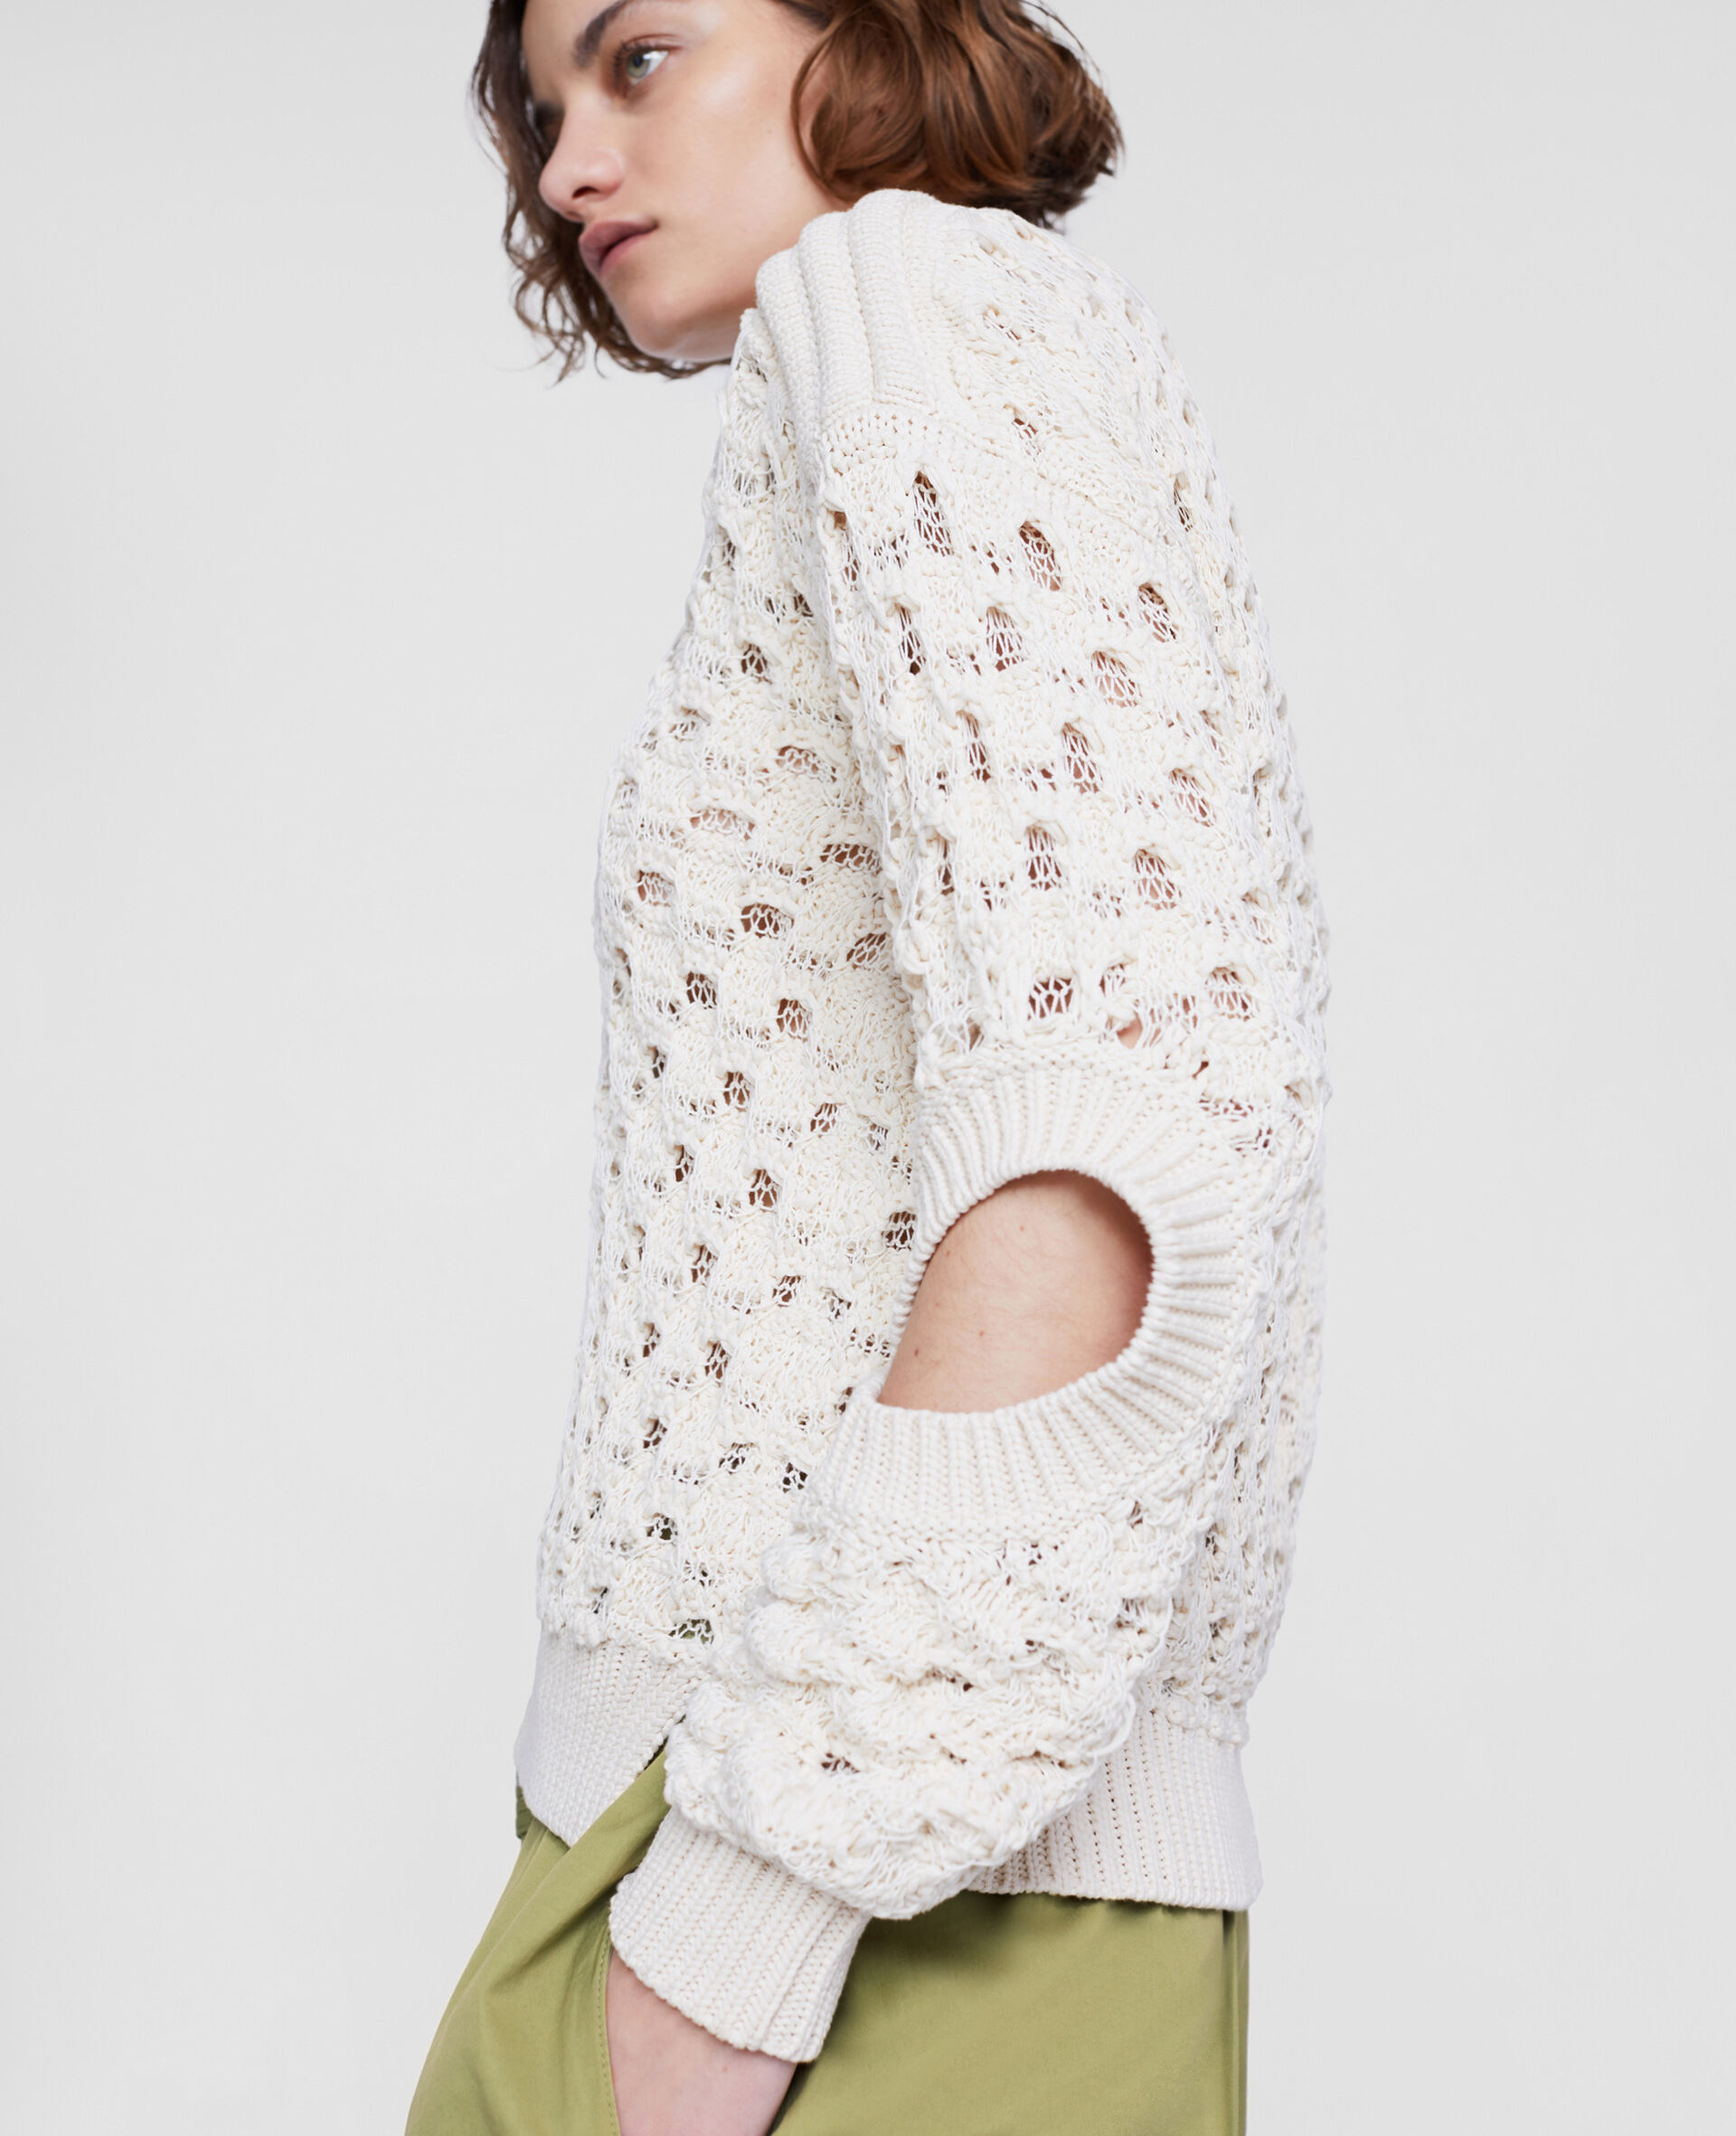 Textured Mesh Knit Sweater-White-large image number 3